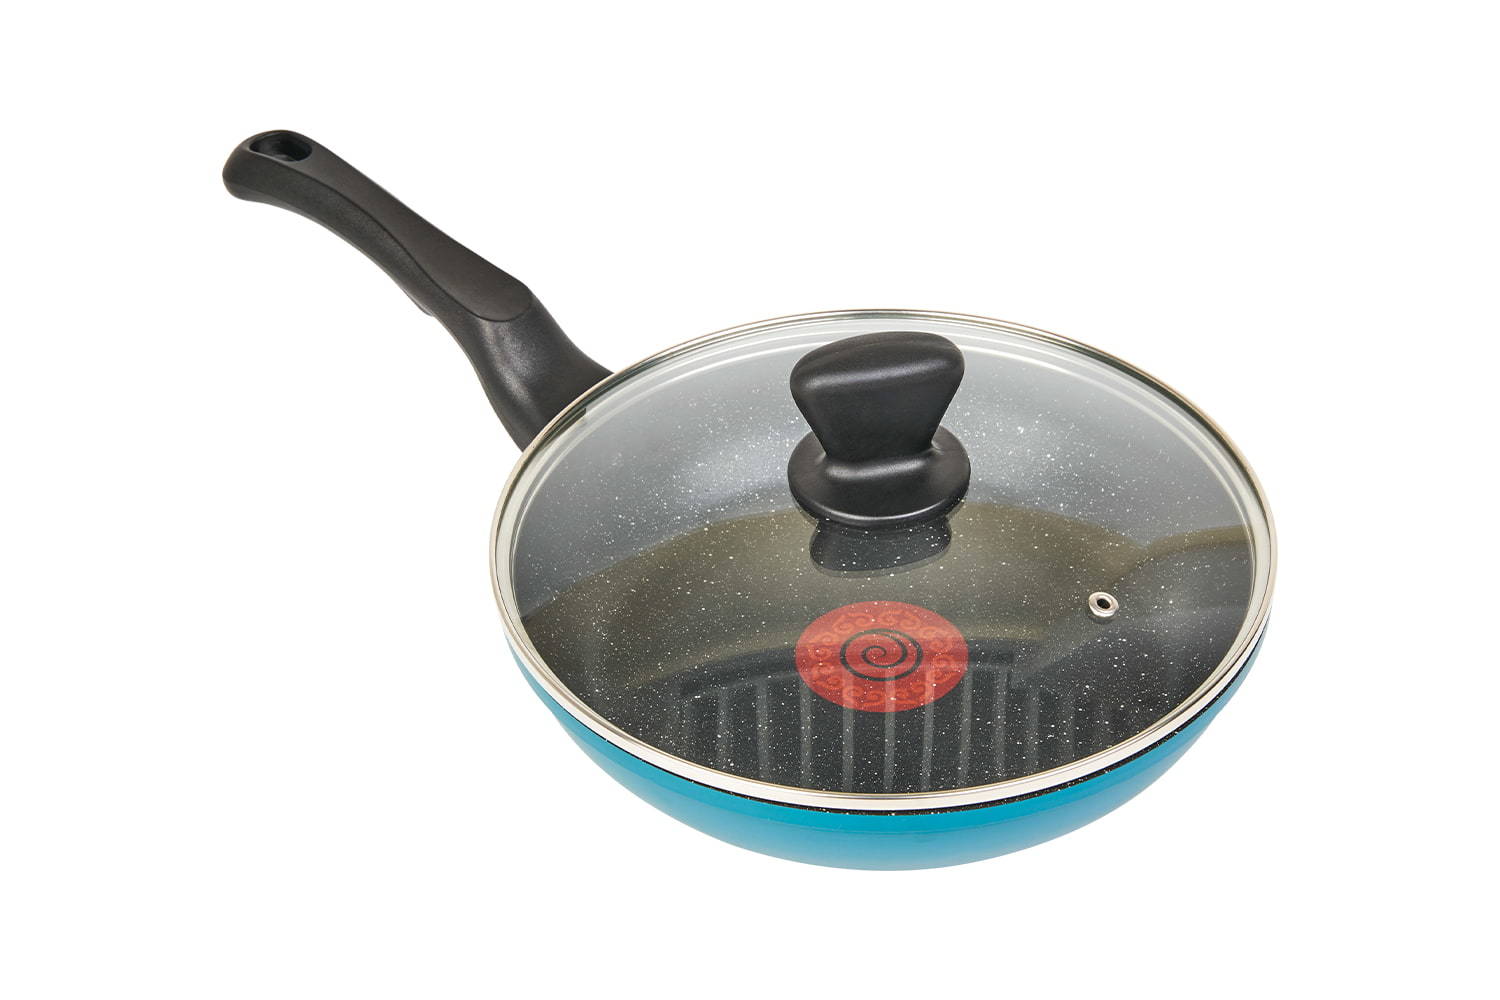 CF-CLB2693D Nonstick Frying Pans, with Lid & Nonstick Stone-Derived Coating